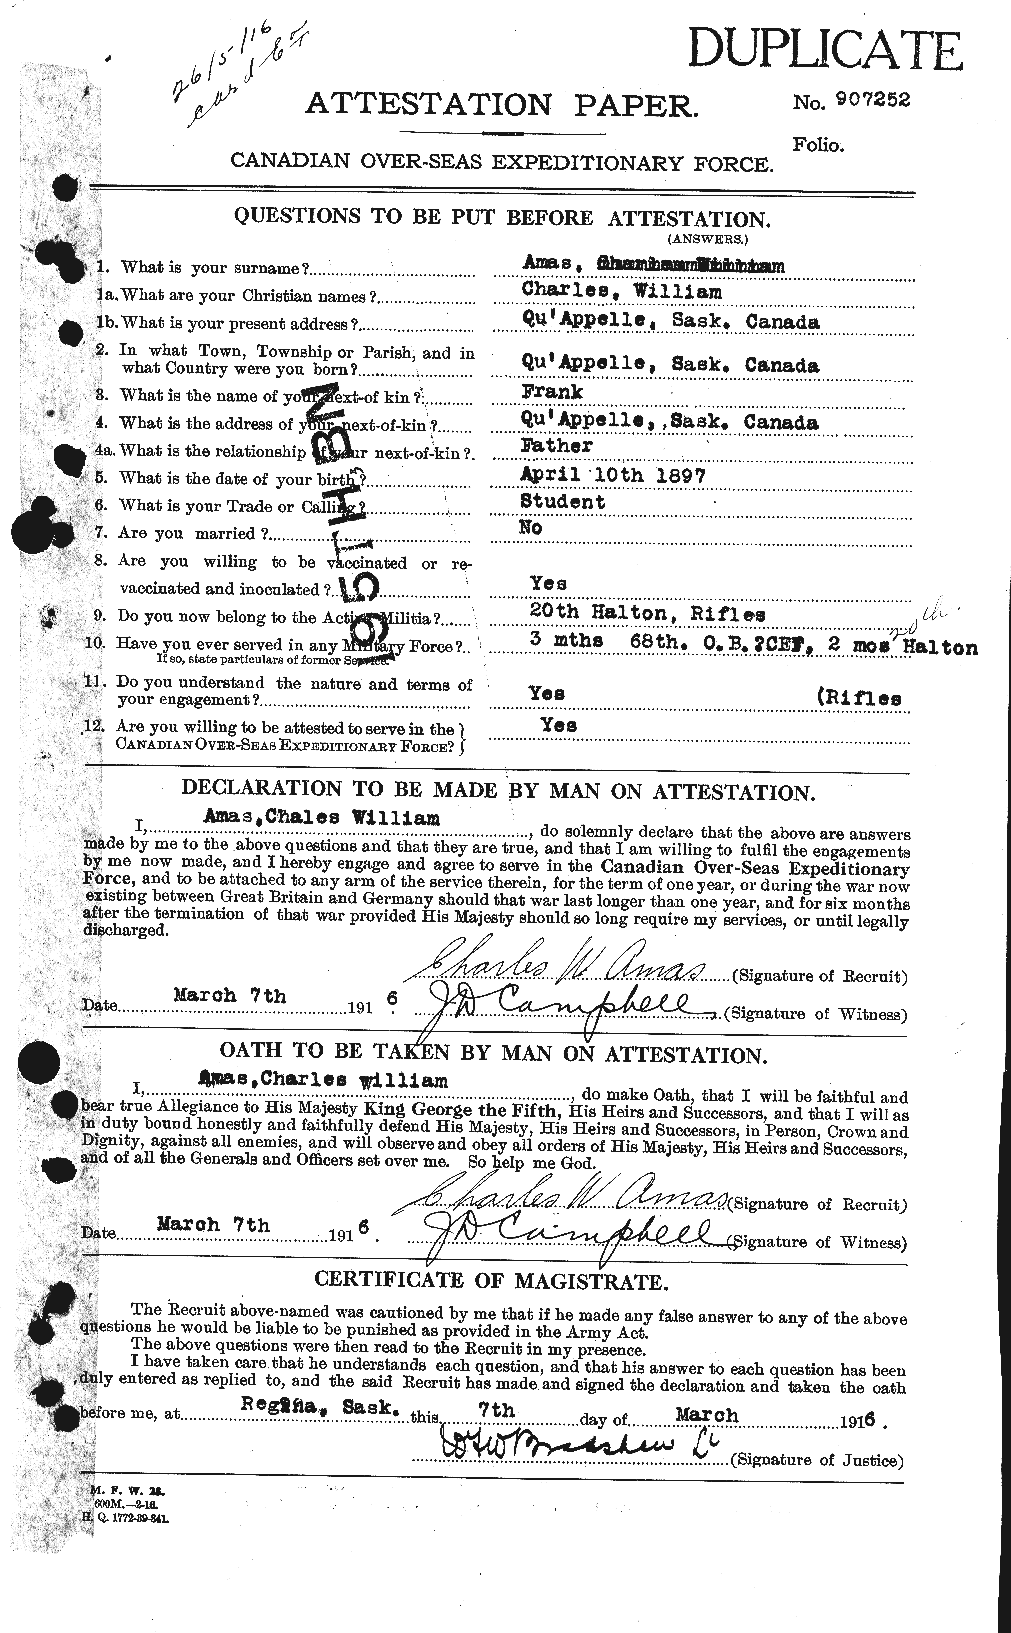 Personnel Records of the First World War - CEF 208999a